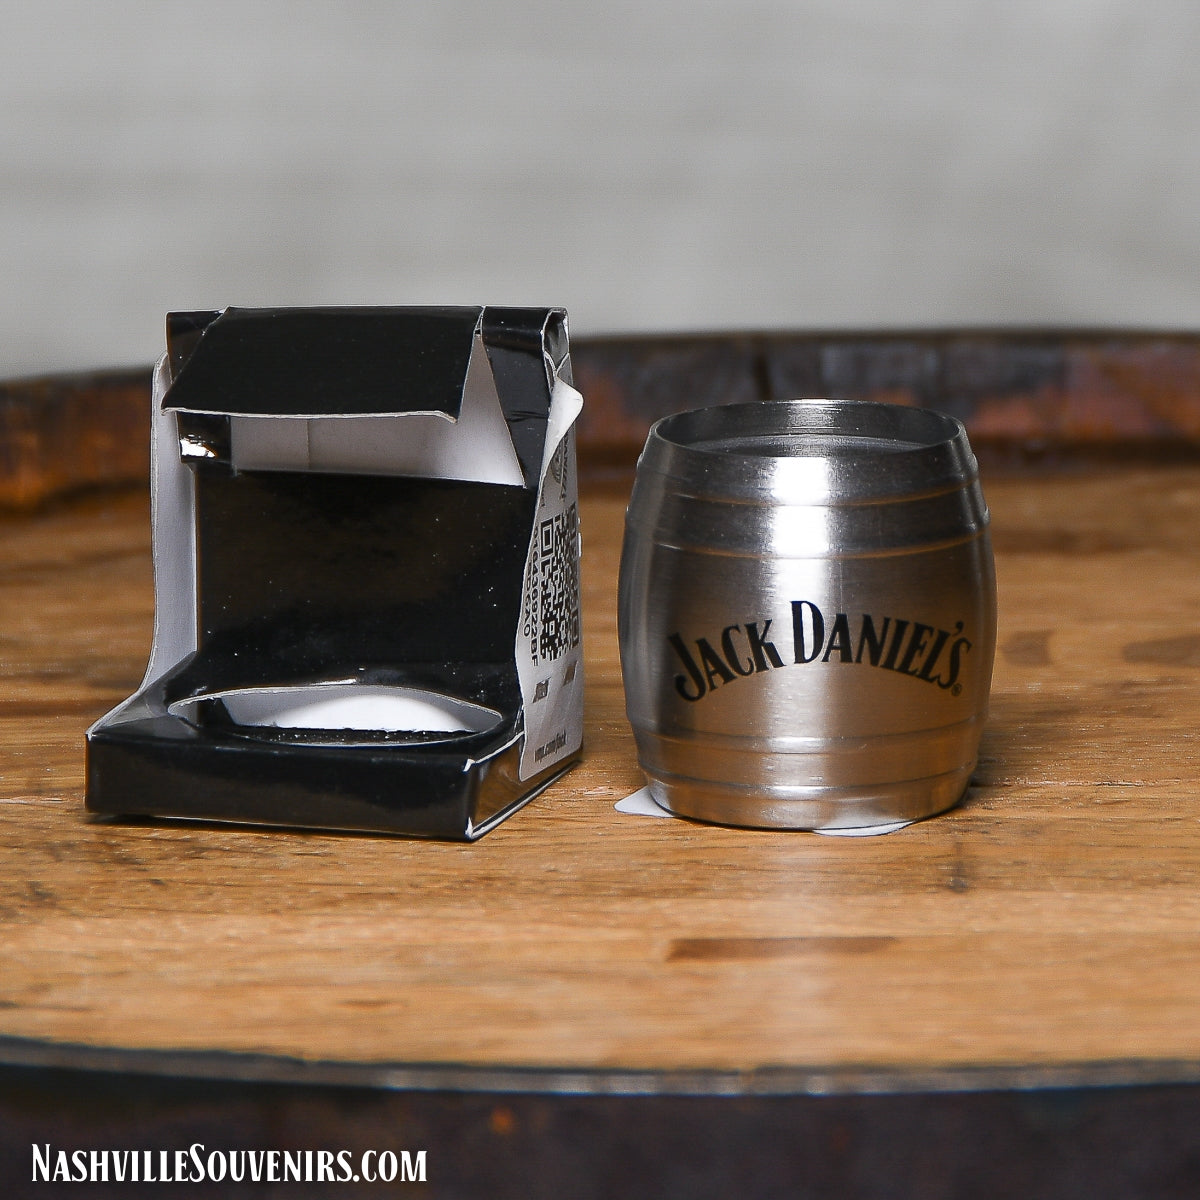 Officially licensed Jack Daniels 1 oz Barrel shot.  FREE SHIPPING on all US orders over $75!